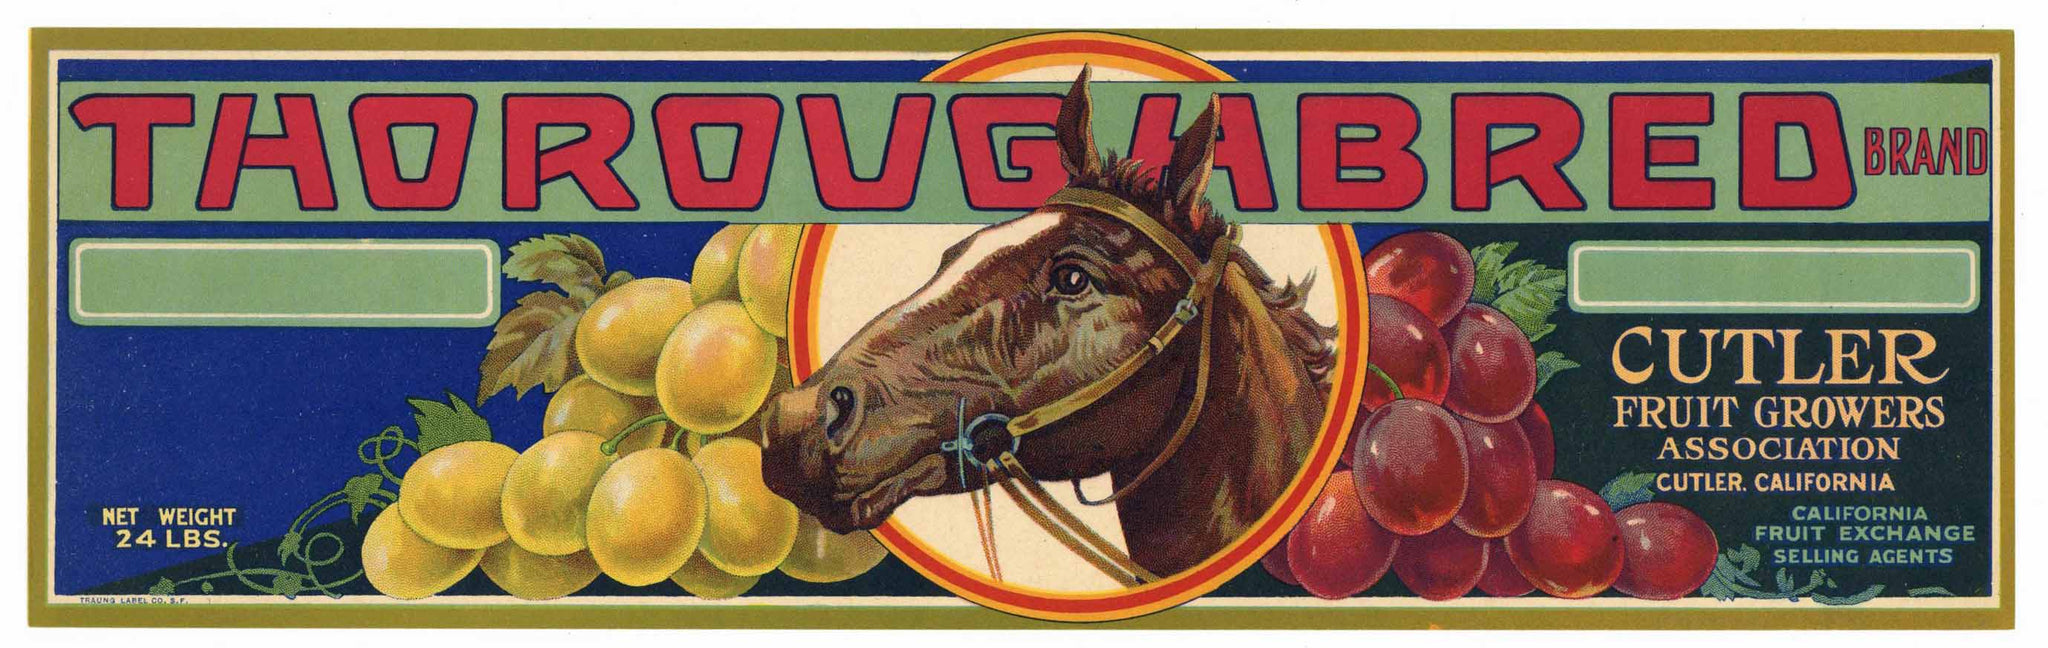 Thoroughbred  Brand Vintage Cutler Grape Crate Label, 24 lbs